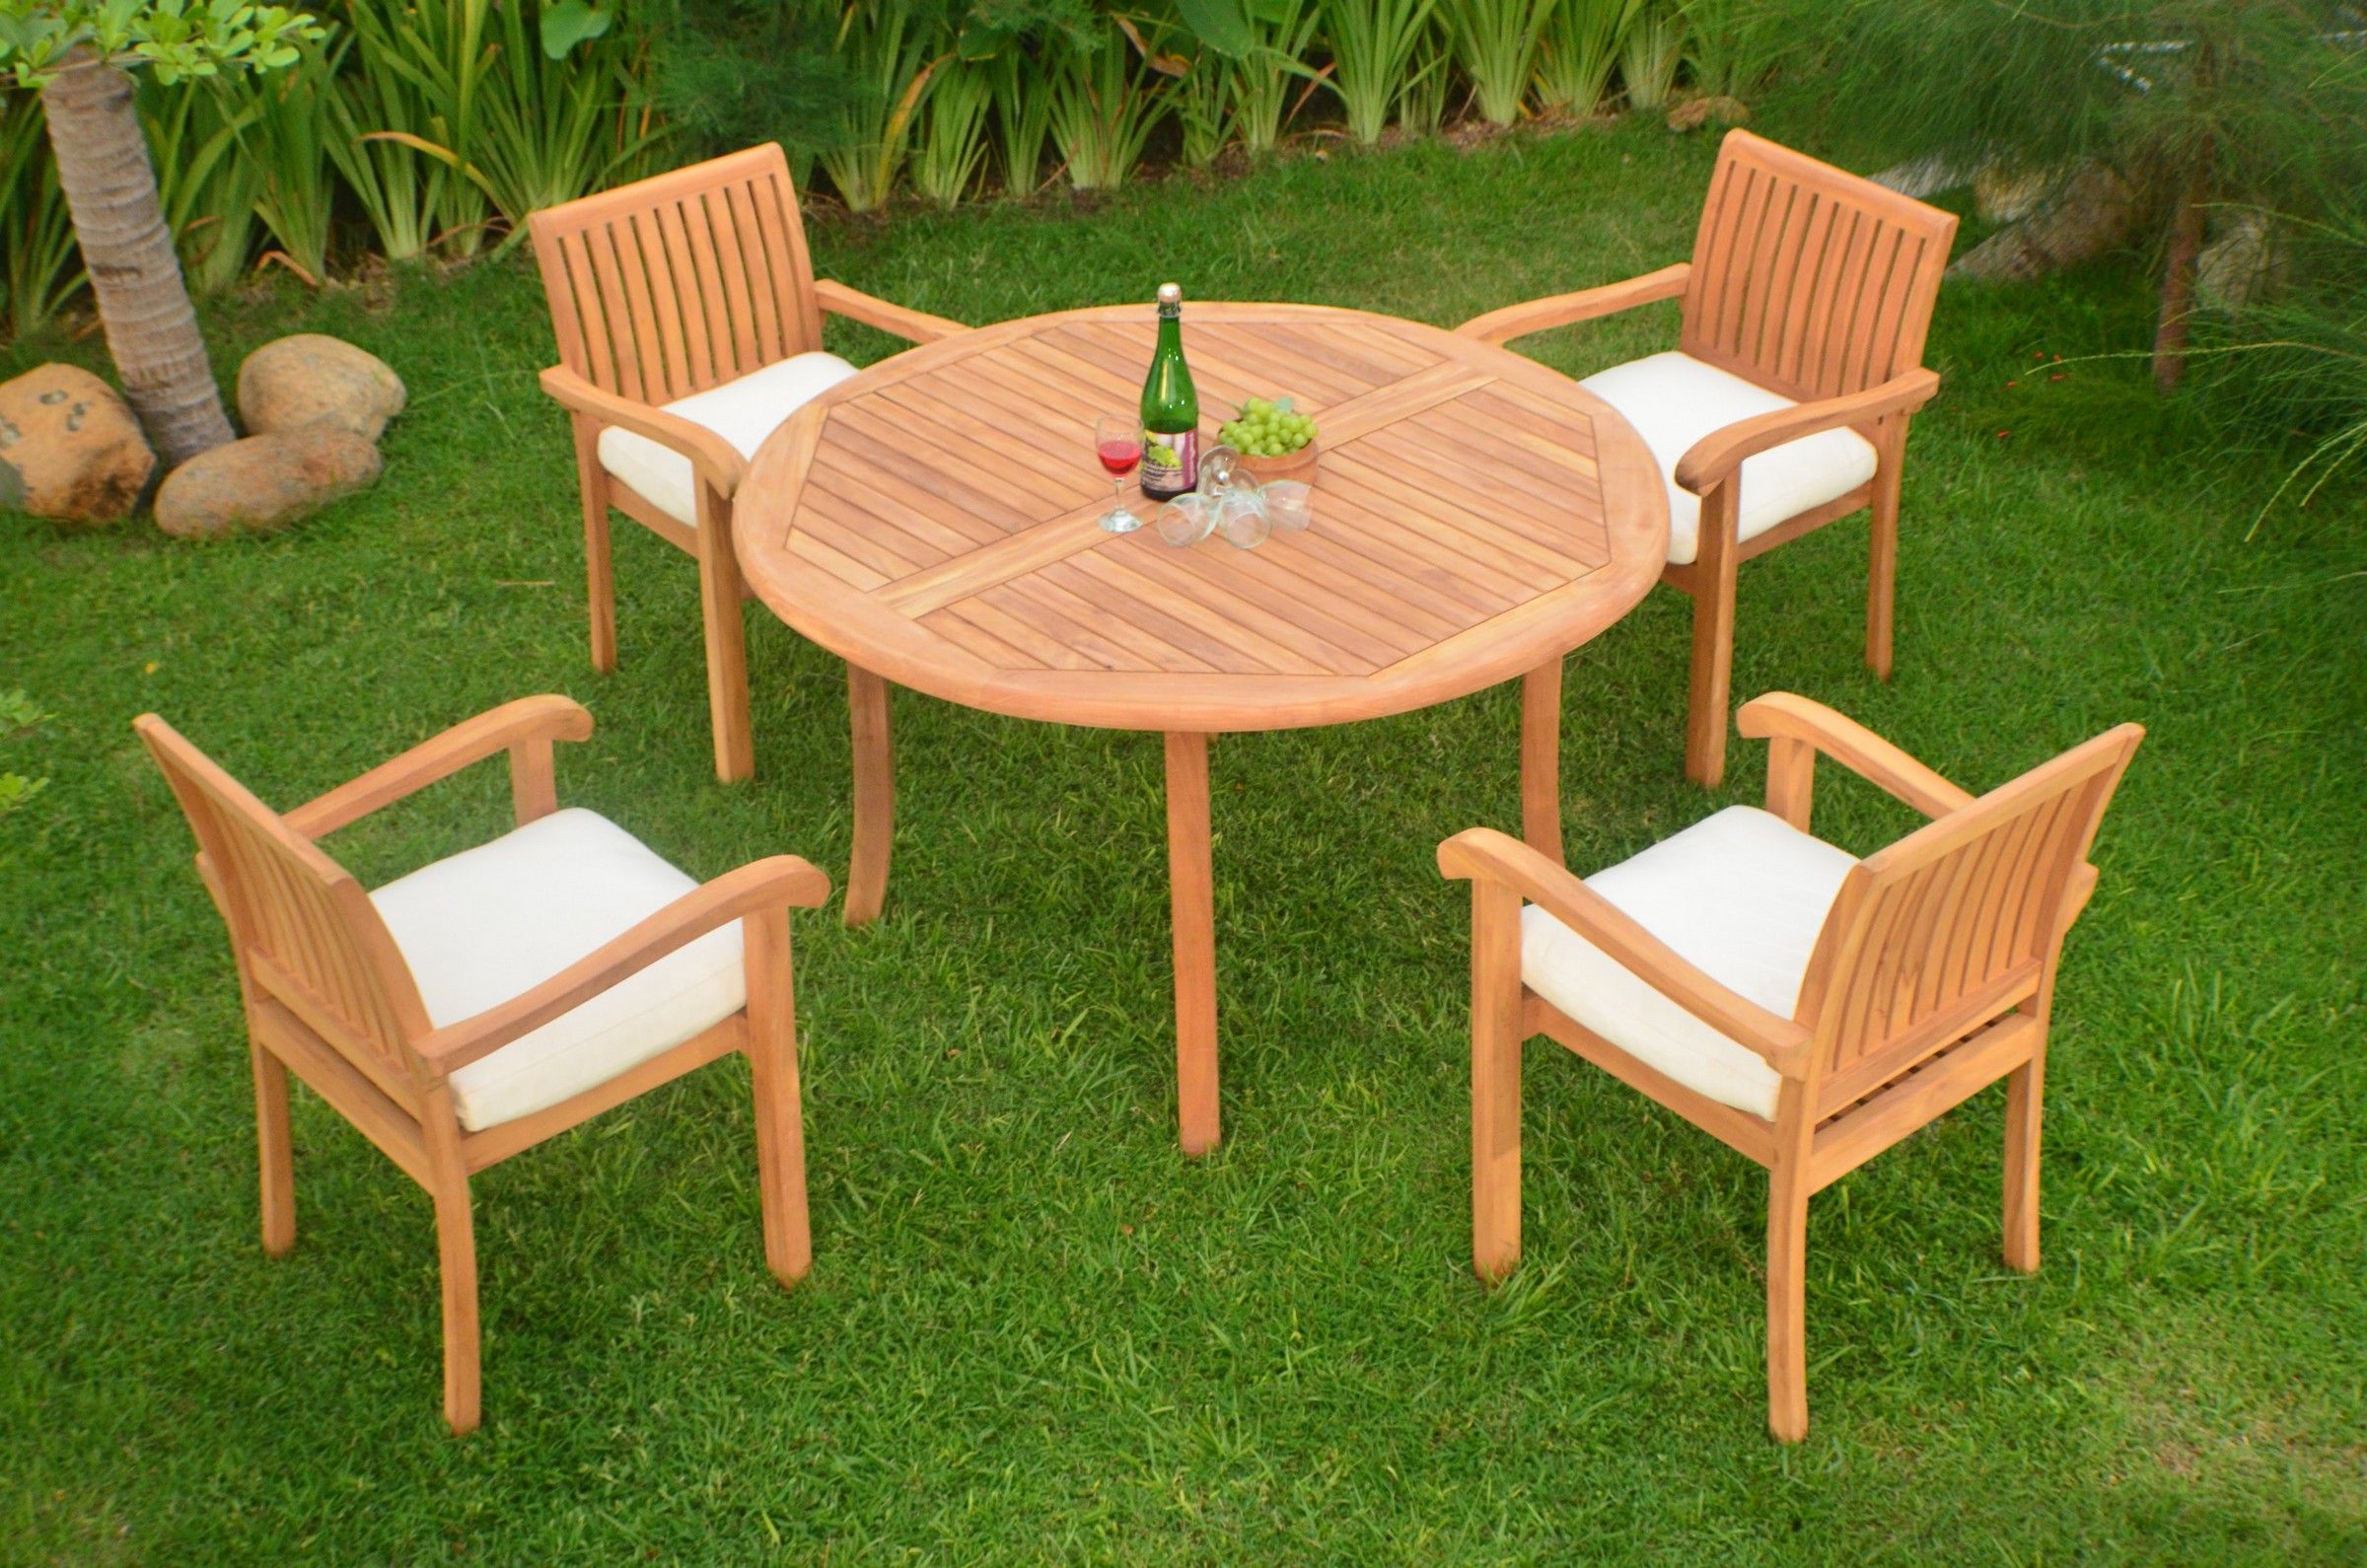 Teak Armchair Round Patio Dining Sets With Regard To Newest Teak Dining Set:4 Seater 5 Pc – 52" Round Table And 4 Stacking Napa Arm (View 6 of 15)